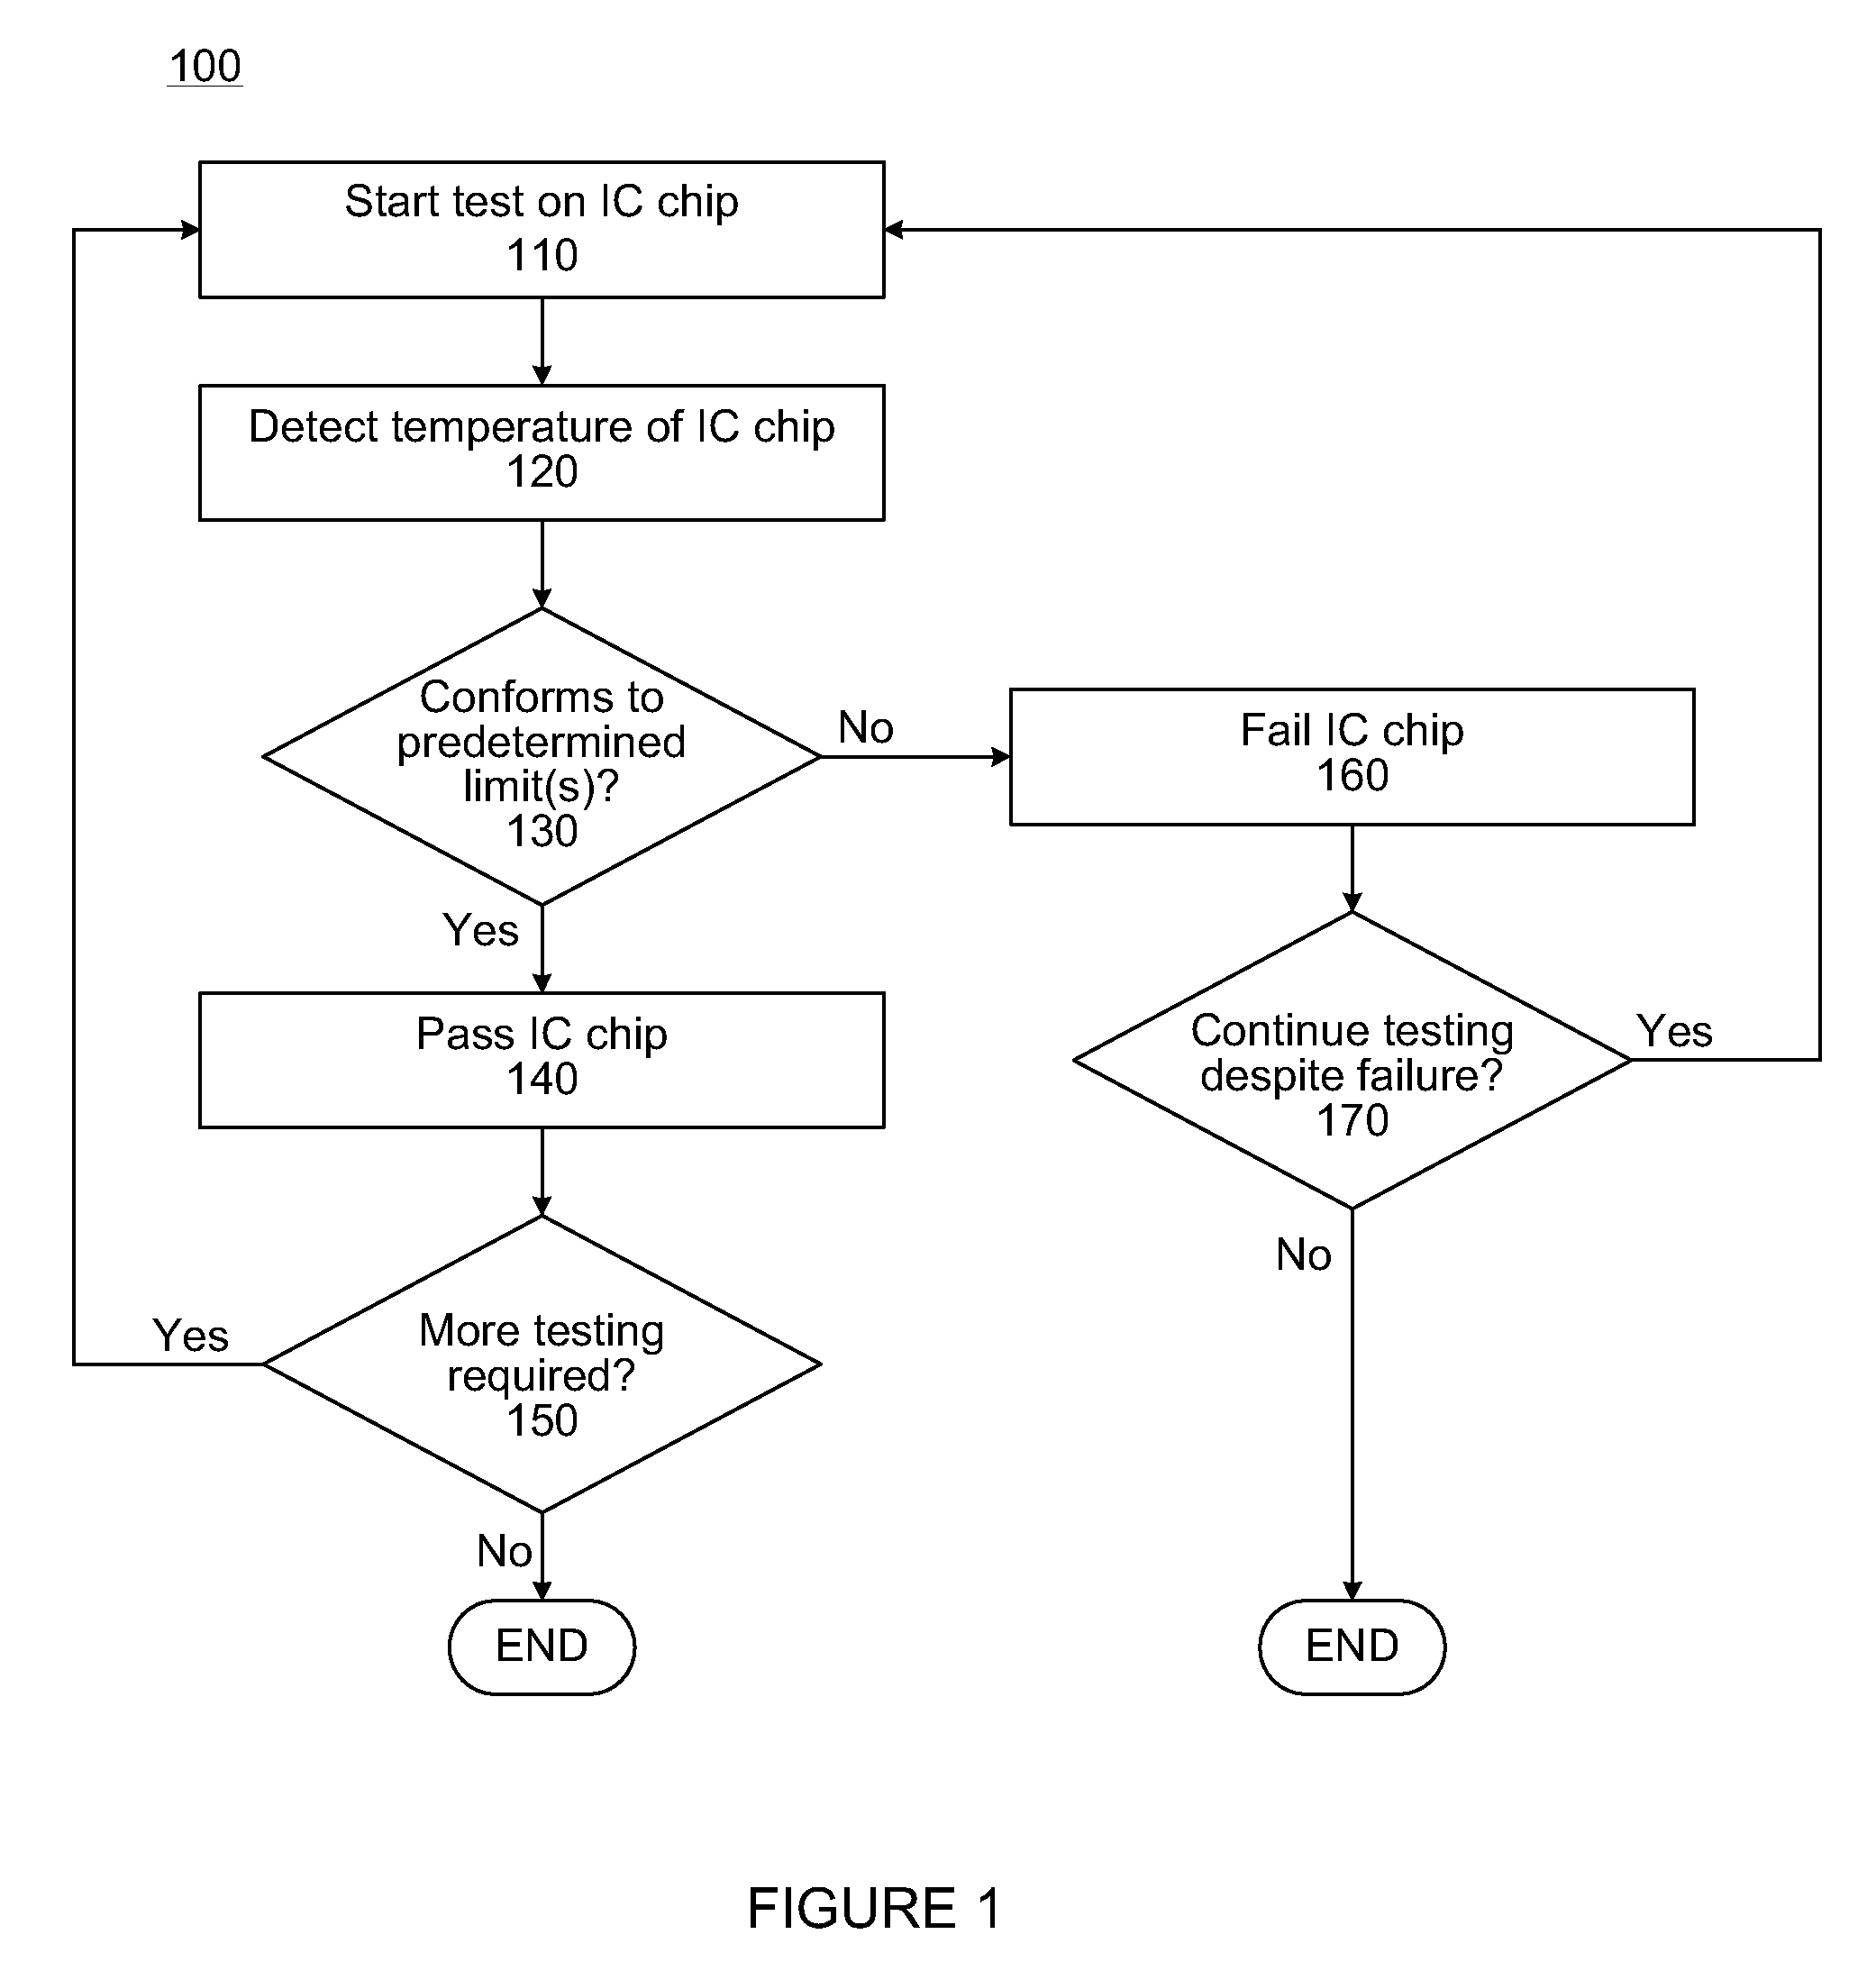 Methods for monitoring chip temperature during test